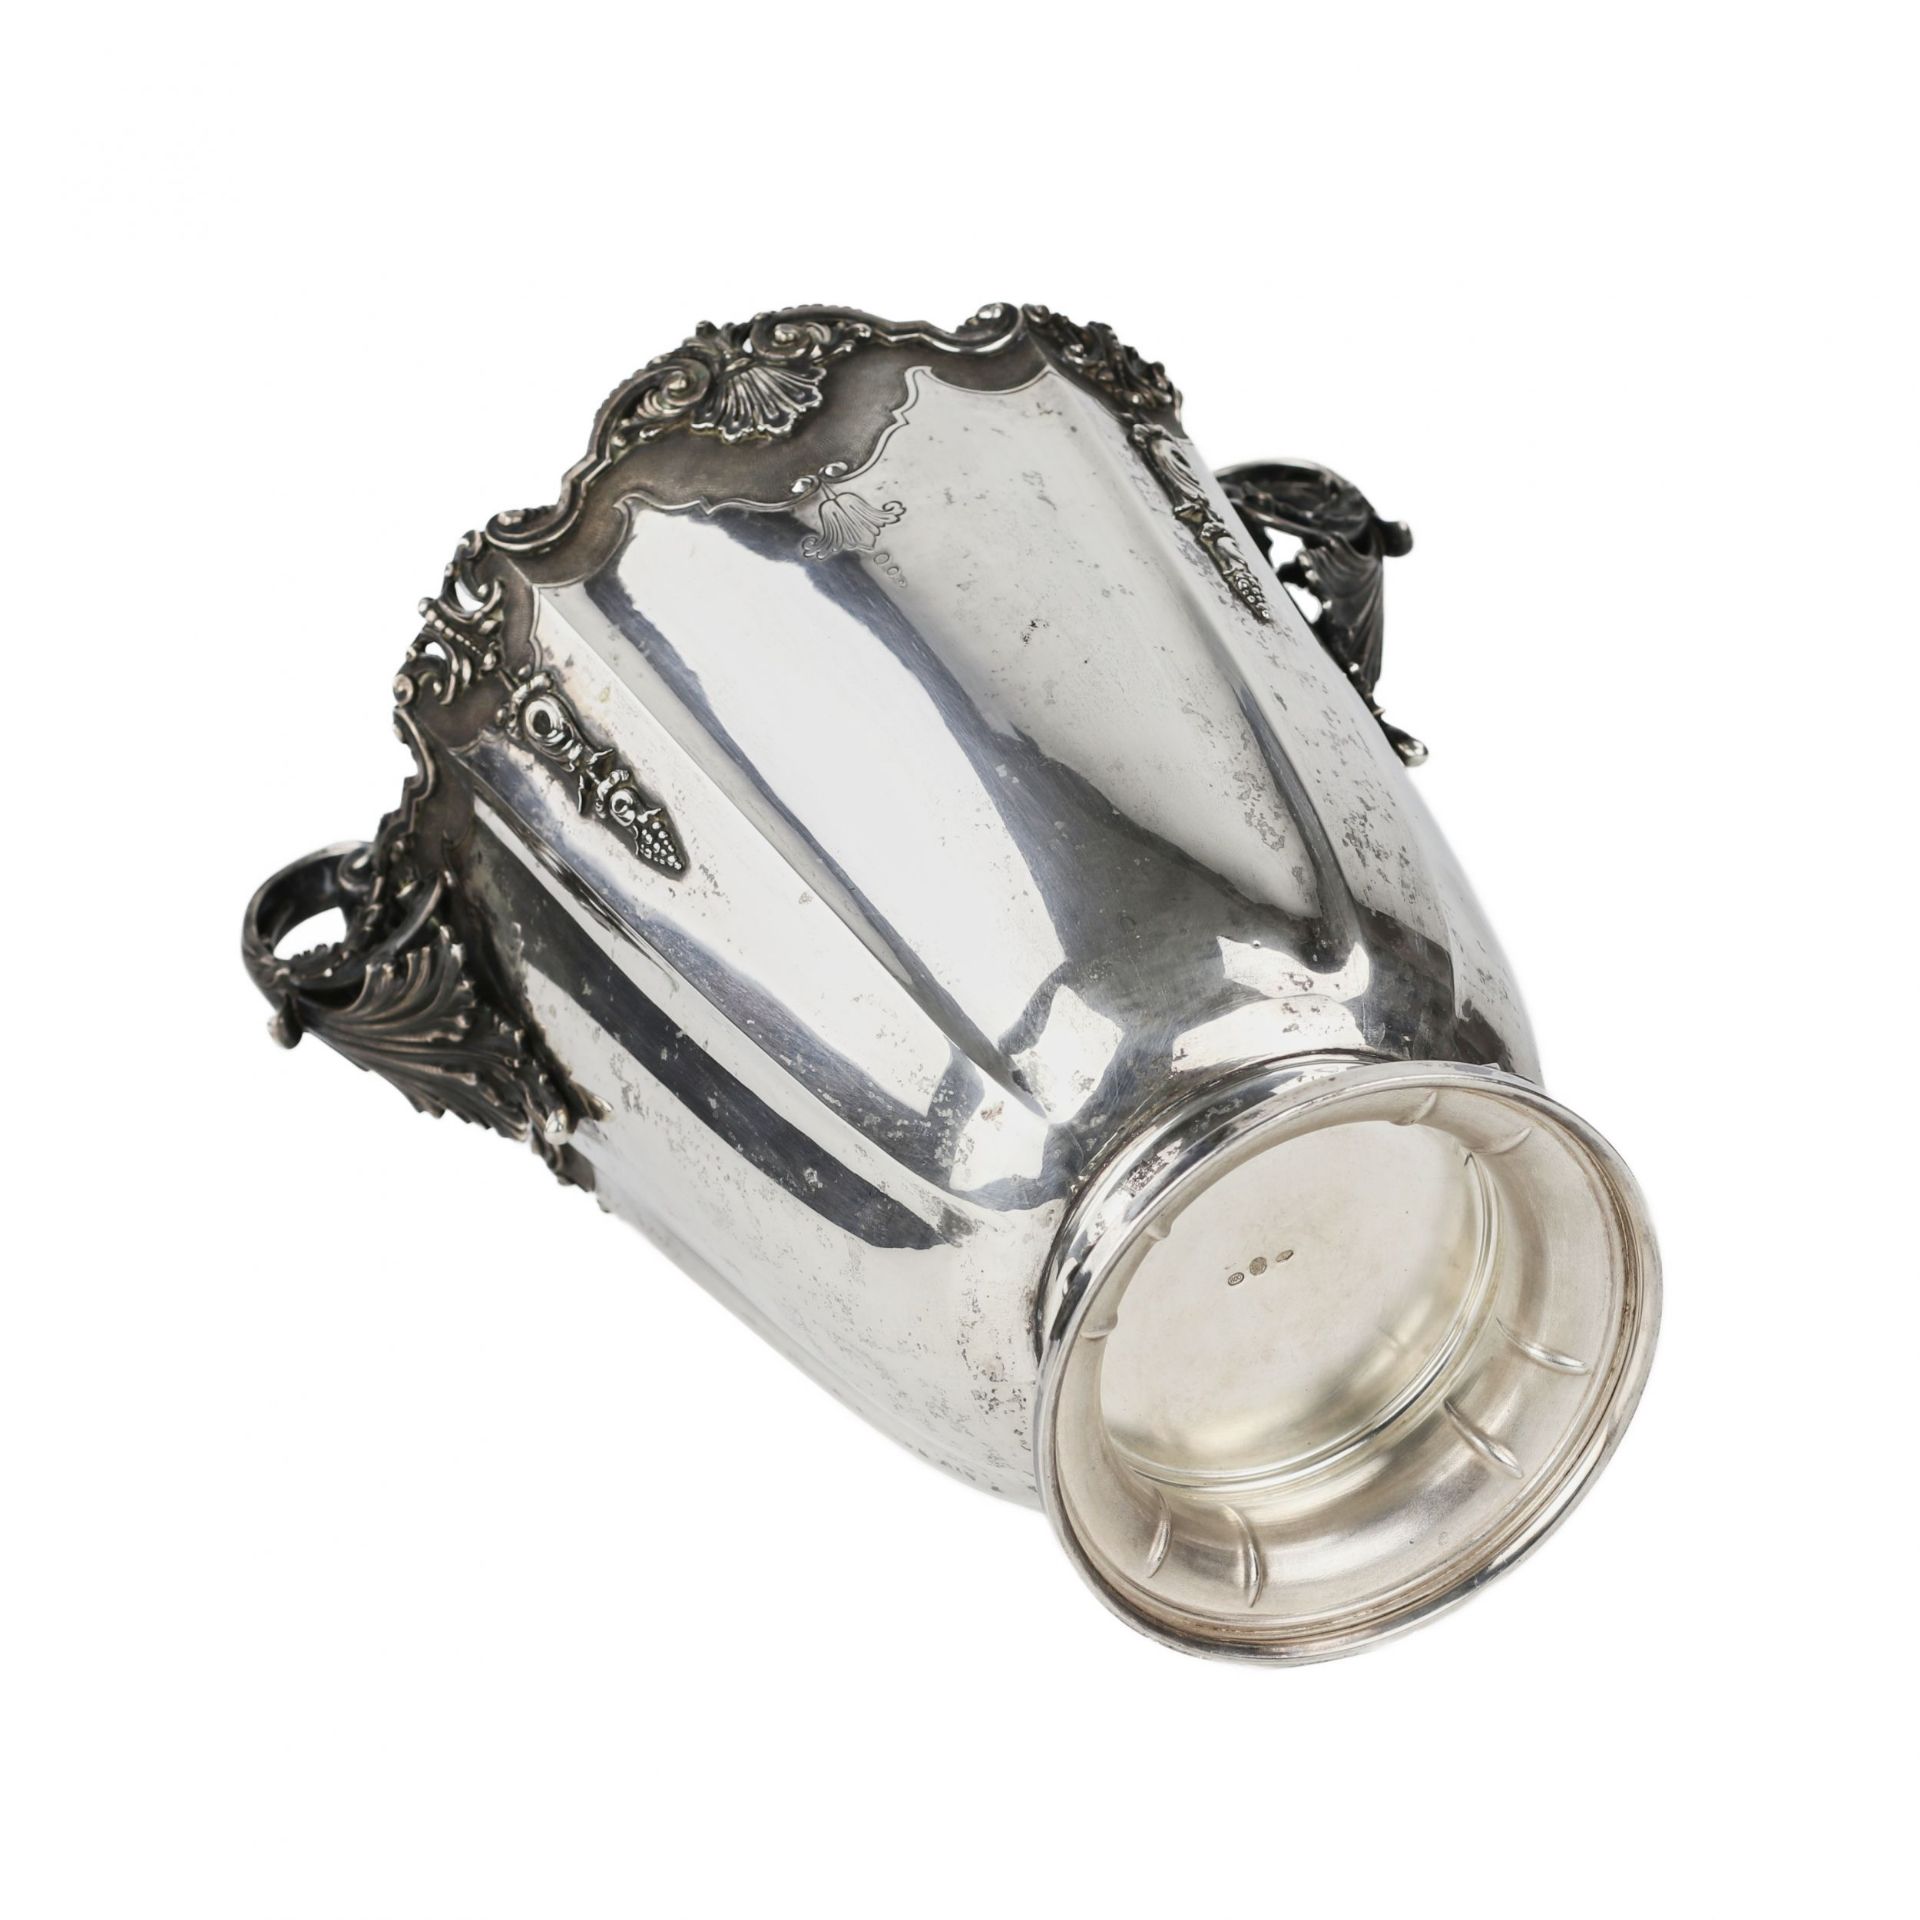 An ornate Italian silver cooler in the shape of a vase. 1934-1944 - Image 6 of 7